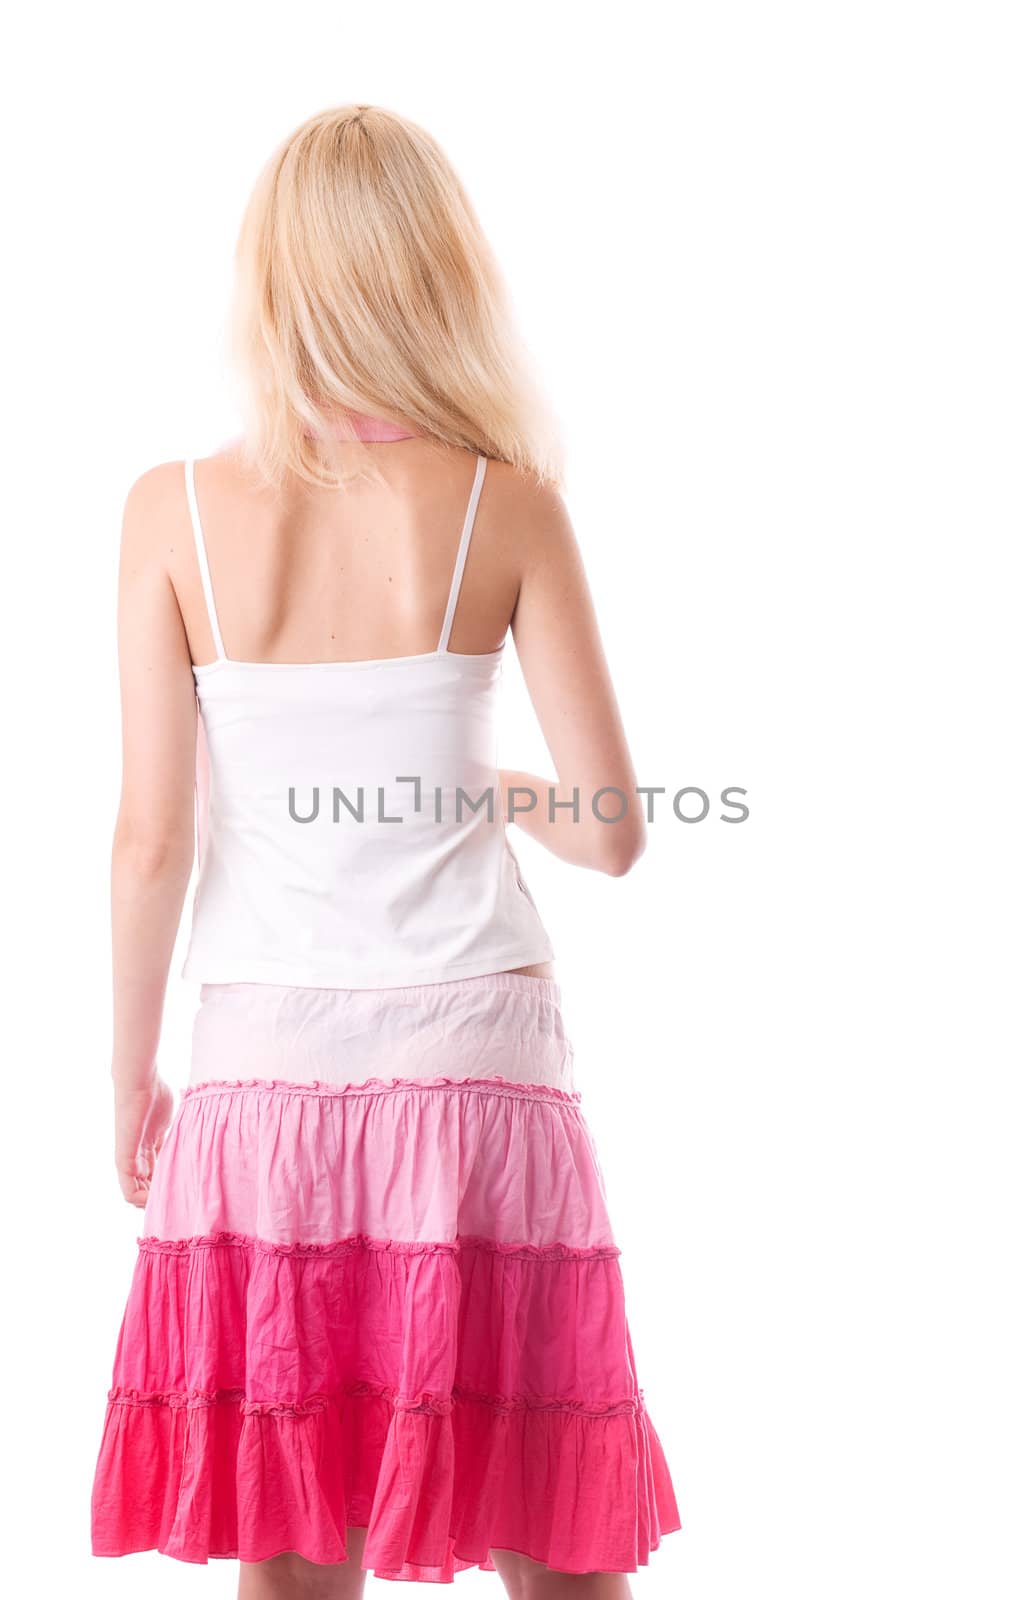 Rear View on fragile young woman back